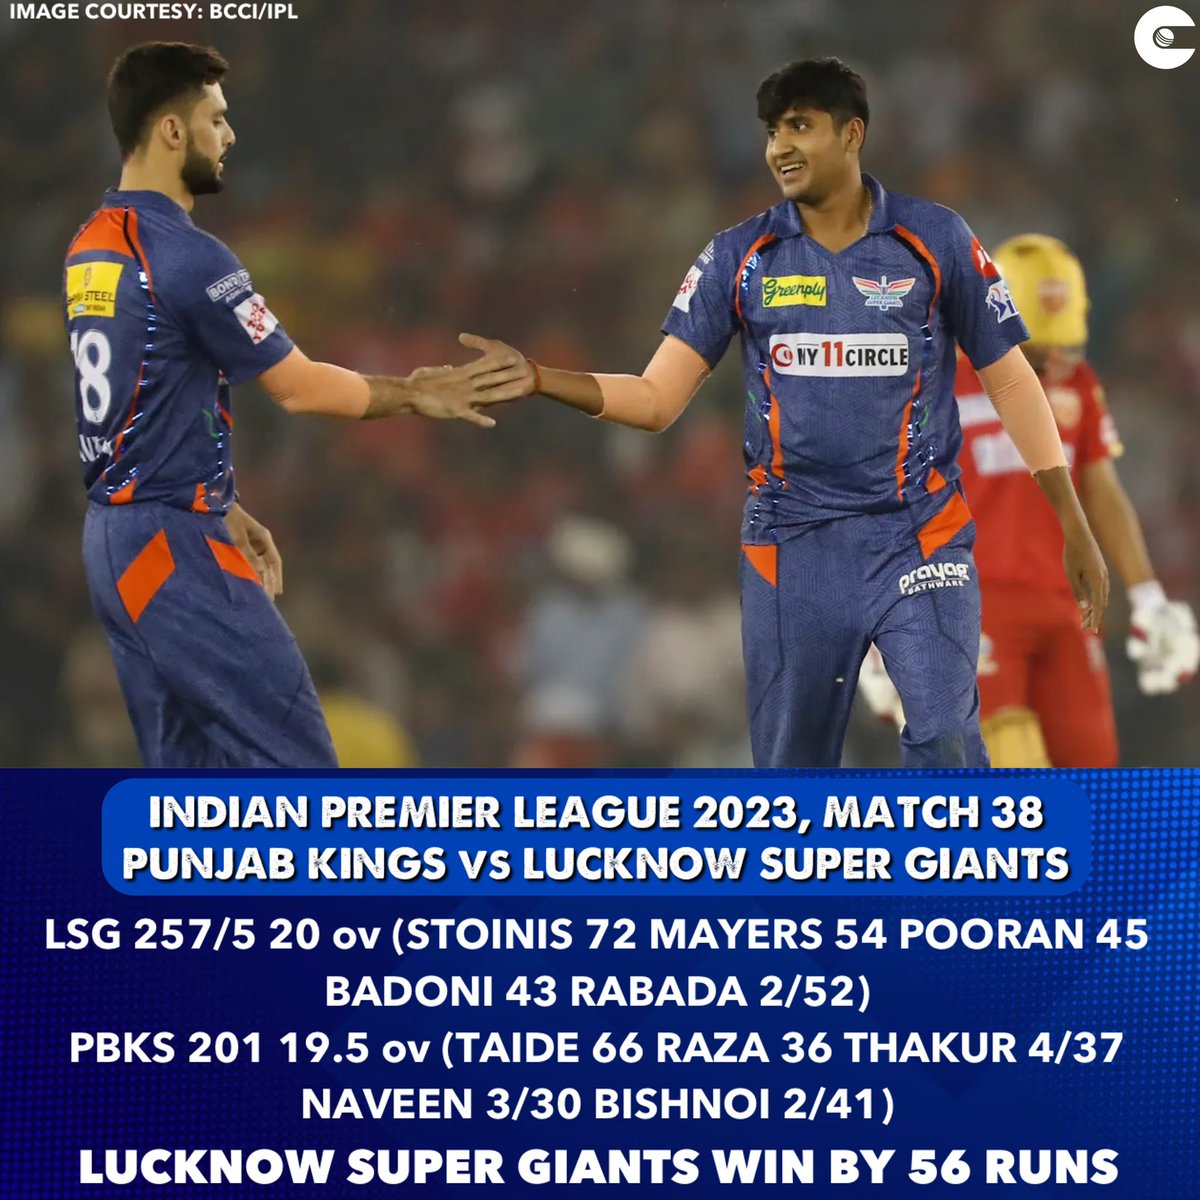 Yash Thakur and @imnaveenulhaq star with the ball as @LucknowIPL record a big win by 56 runs over @PunjabKingsIPL after a special batting performance. #PBKS #LSG #PBKSvLSG #IPL2023